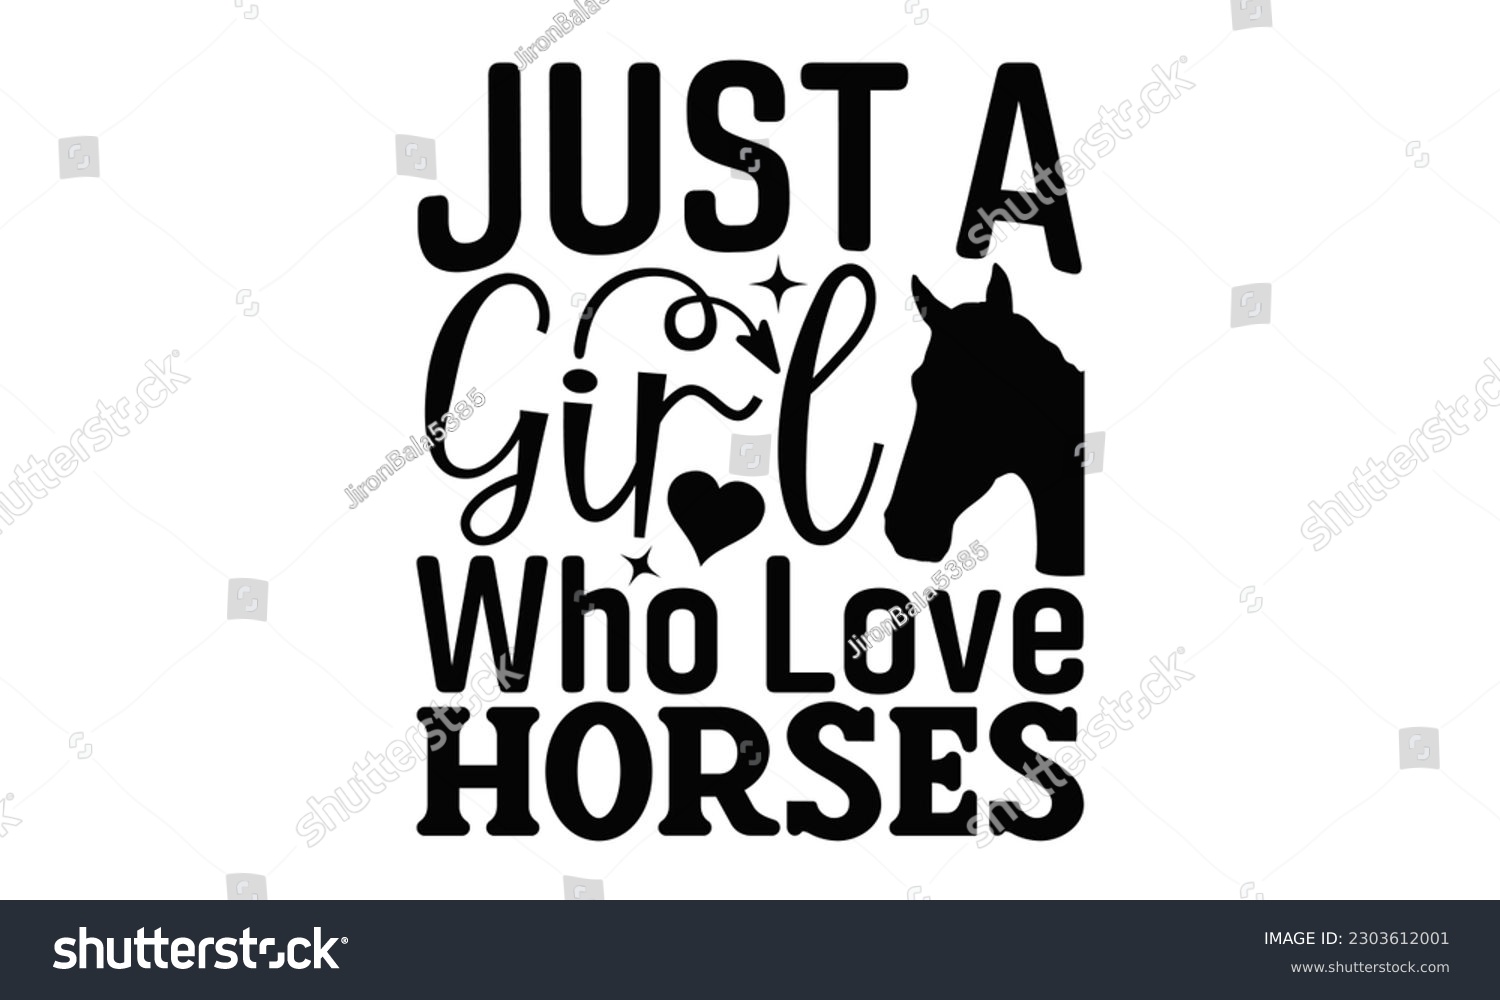 SVG of Just A Girl Who Love Horses - Barbecue SVG Design, Isolated on white background, Illustration for prints on t-shirts, bags, posters, cards and Mug.
 svg